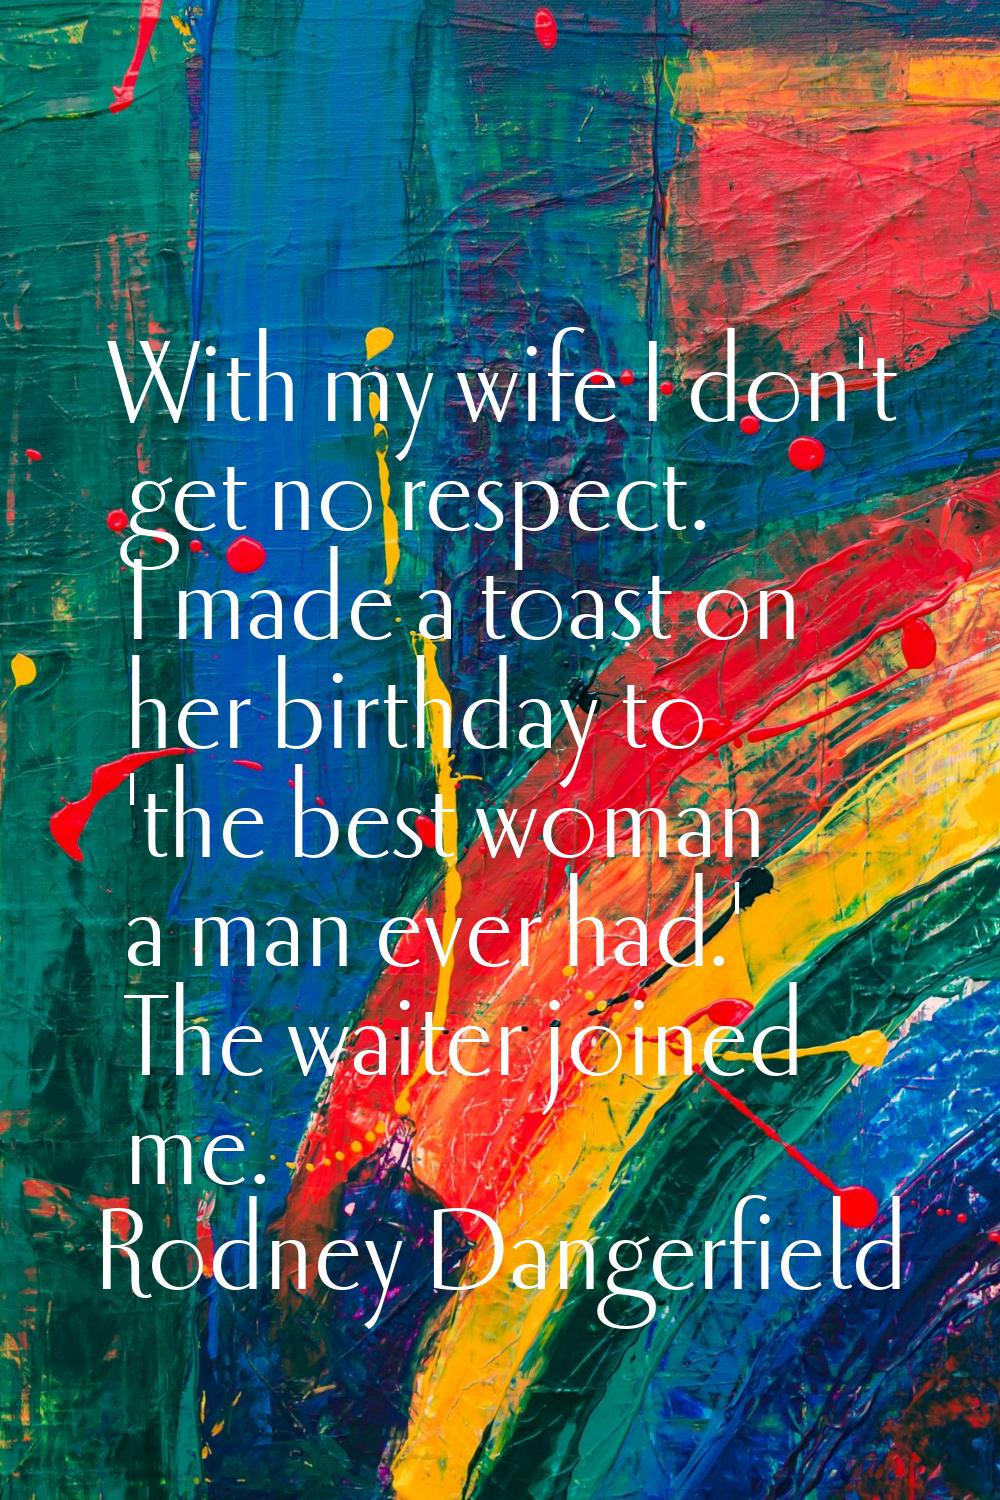 With my wife I don't get no respect. I made a toast on her birthday to 'the best woman a man ever h